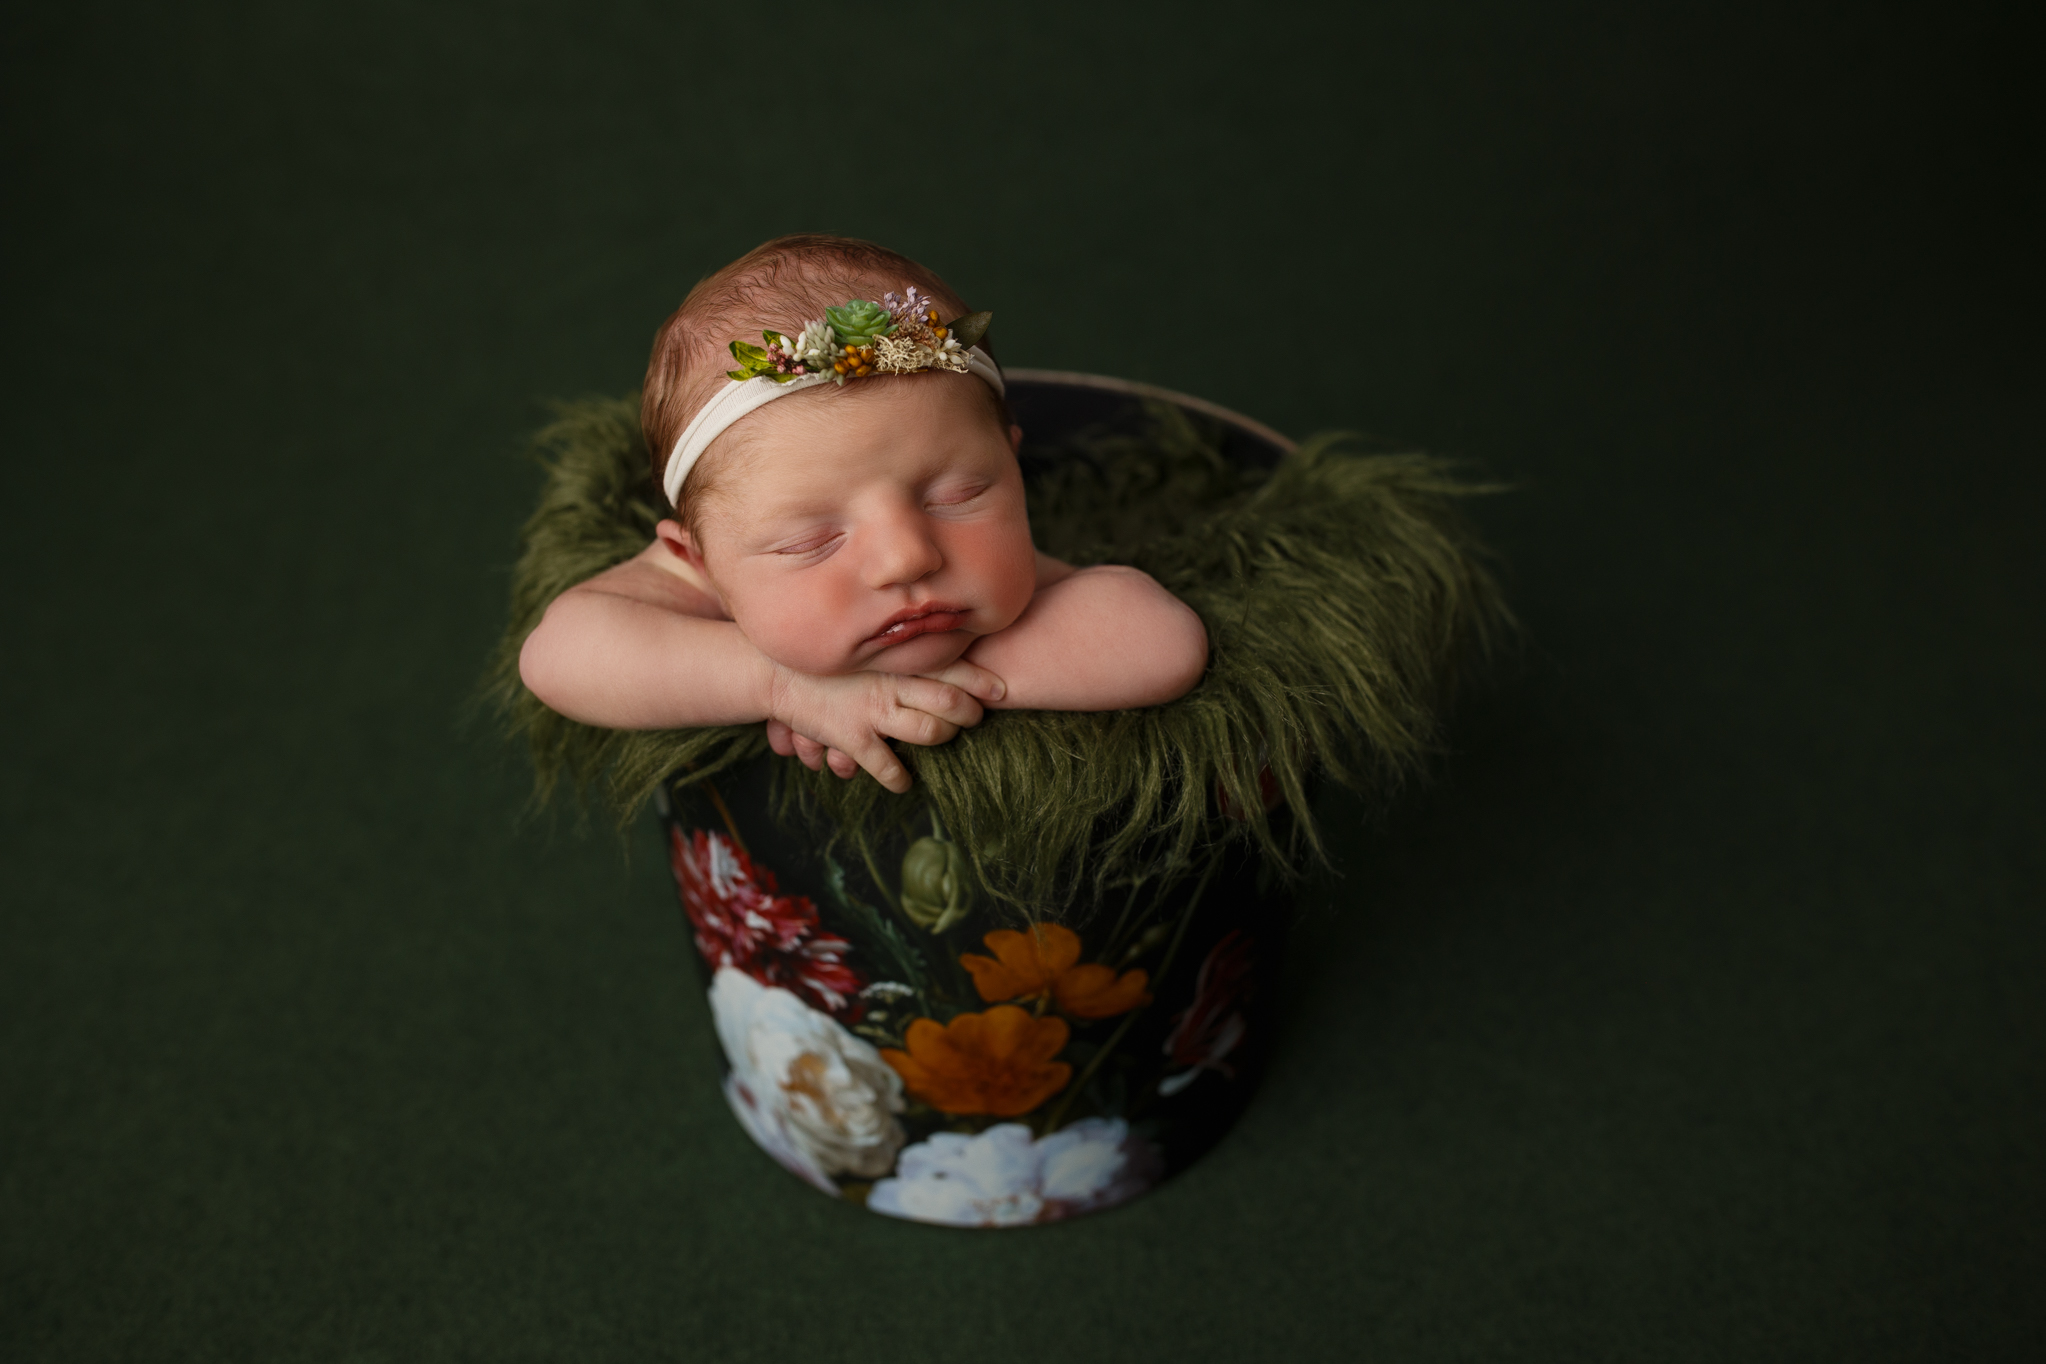 A sleeping baby girl in a floral bucket with a dark green background.